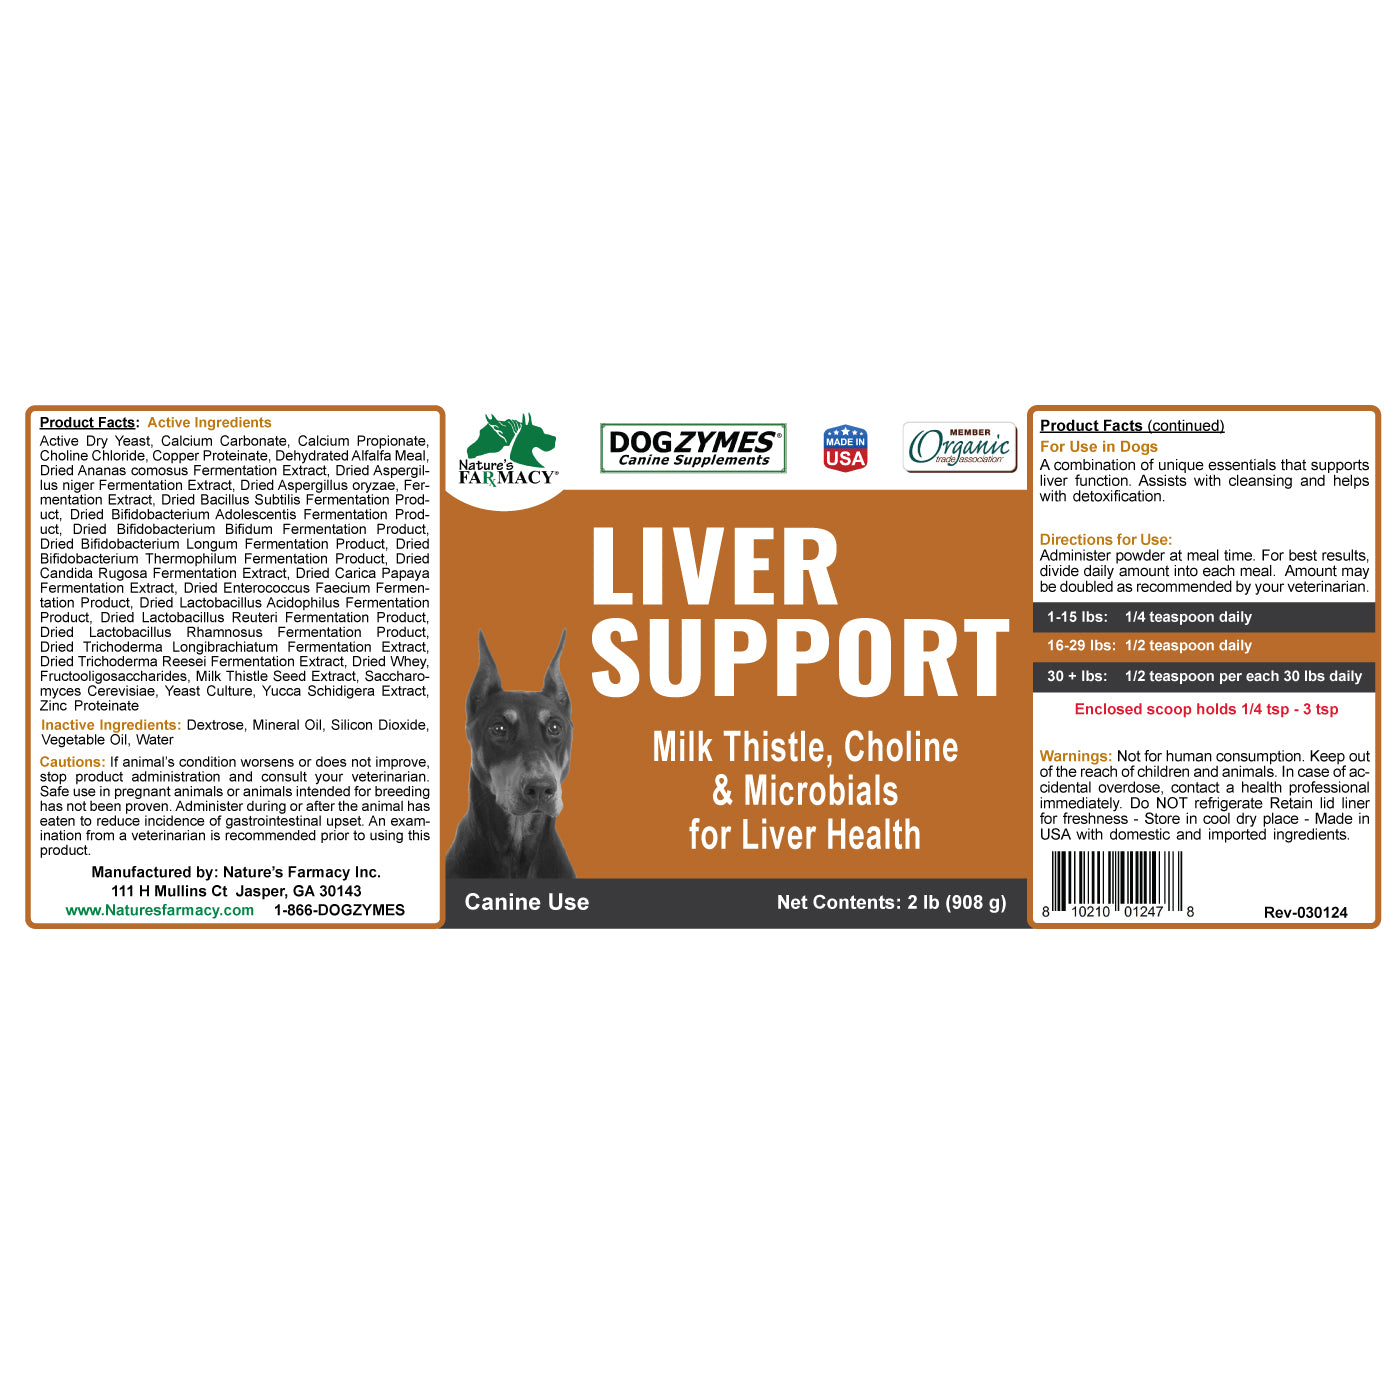 Dogzymes Liver Support